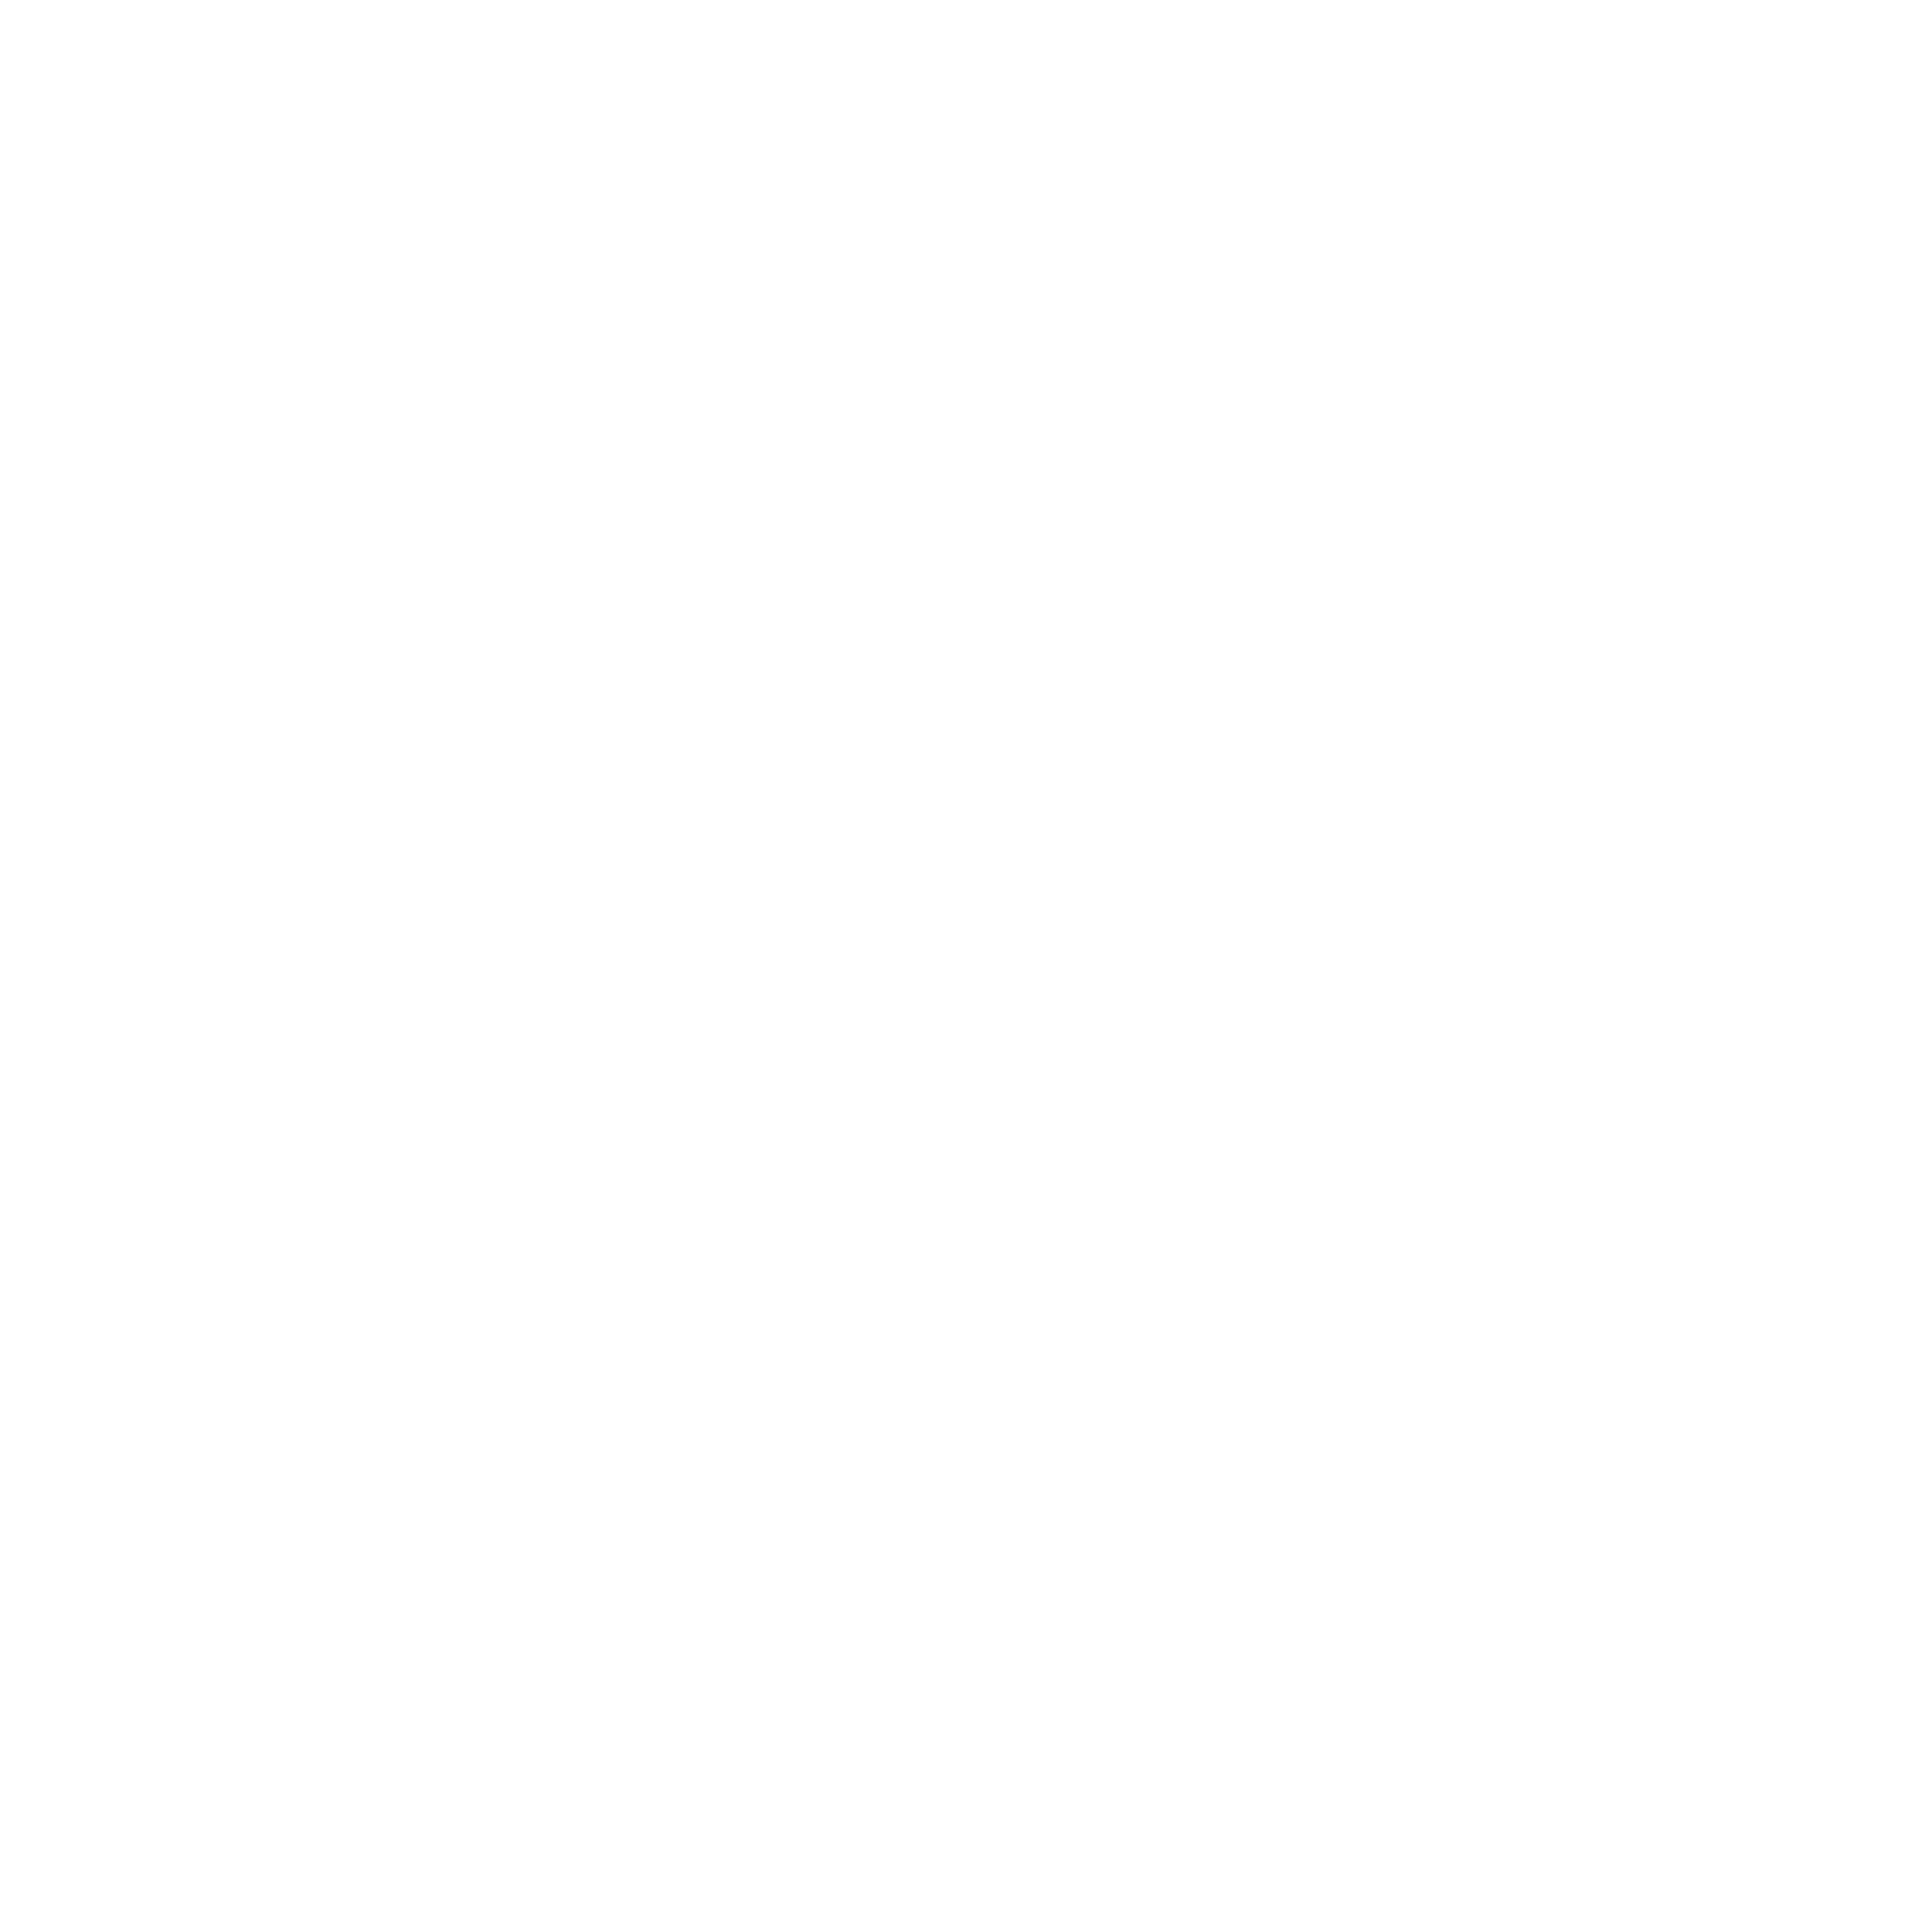 All BlackStrap fabrics are Lens-Safe, so don't be afraid to clean your lens scratch free. 